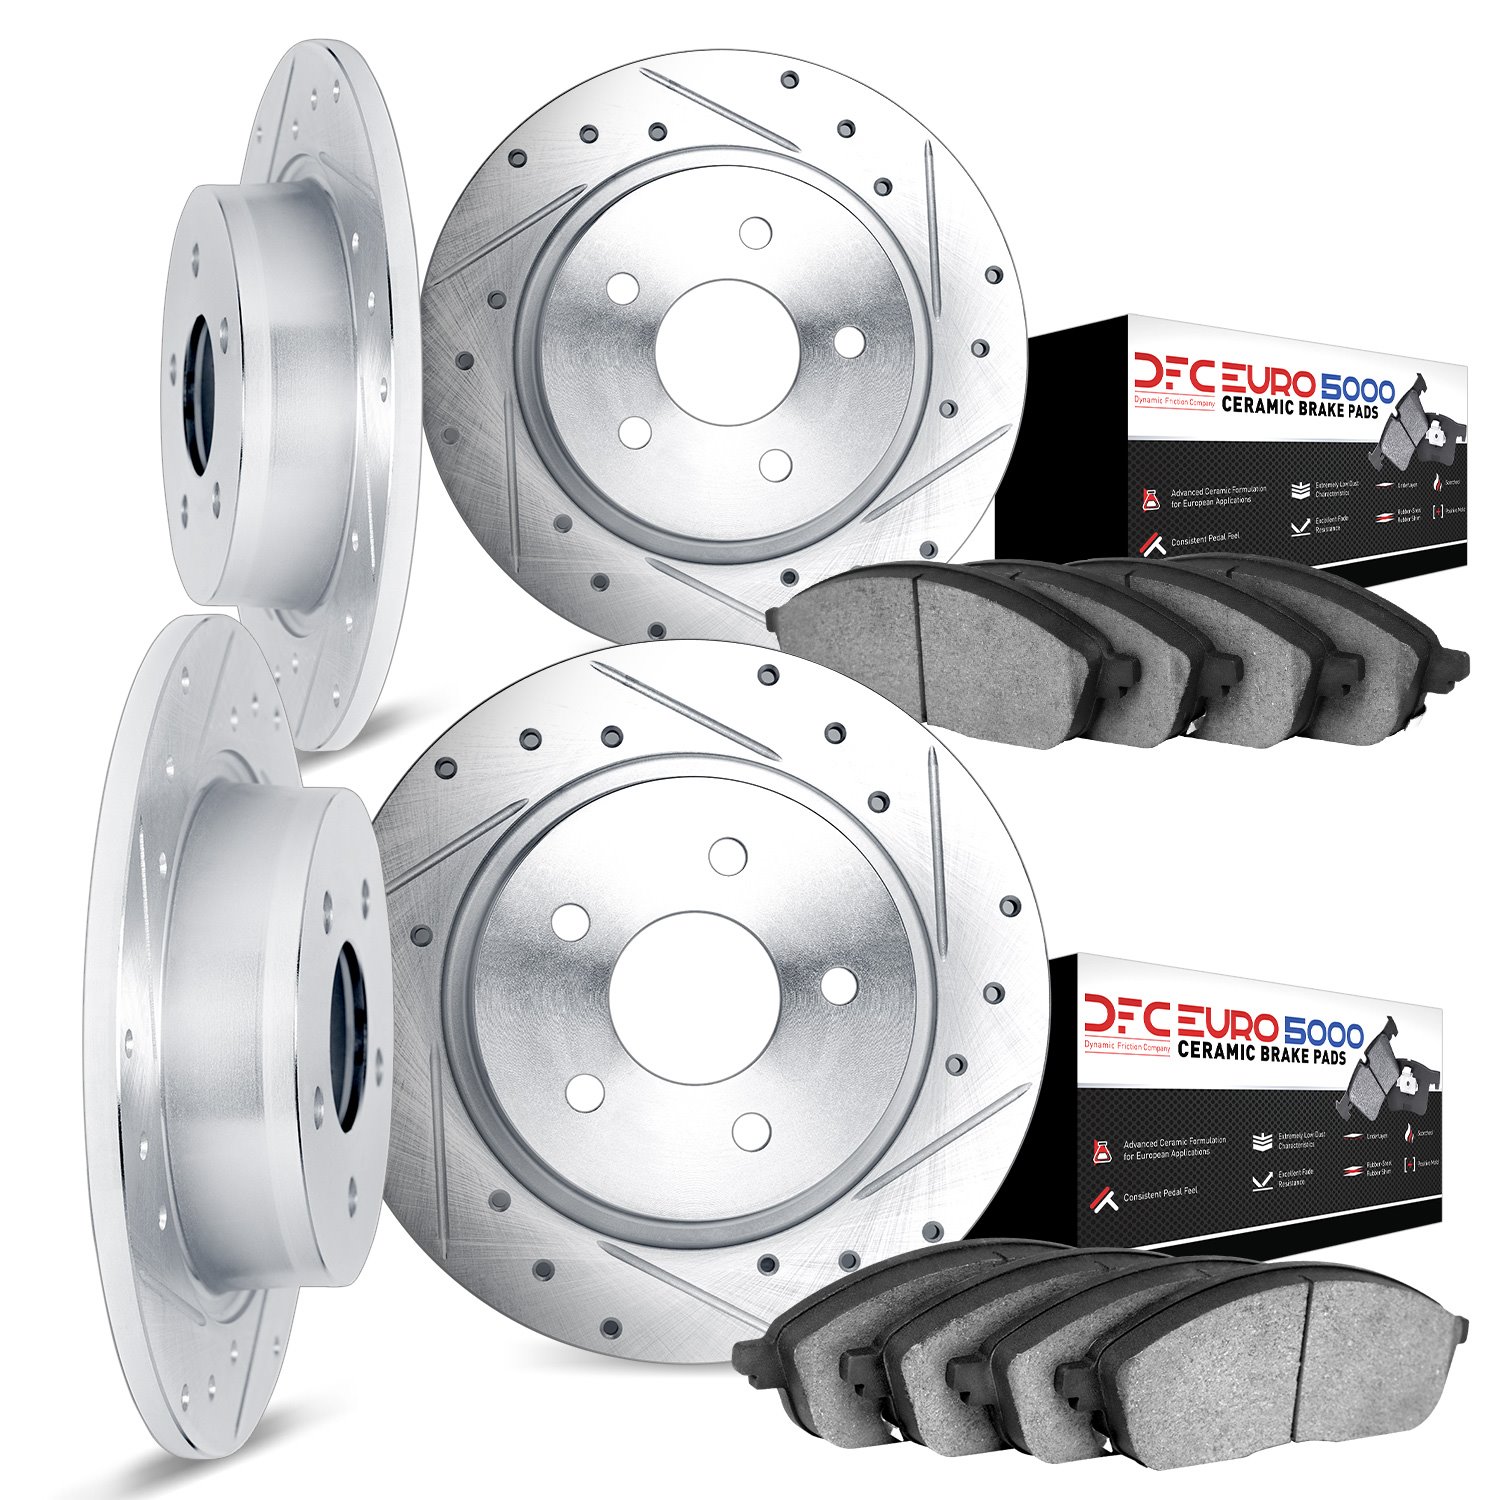 7604-63004 Drilled/Slotted Brake Rotors w/5000 Euro Ceramic Brake Pads Kit [Silver], 1965-1973 Mercedes-Benz, Position: Front an